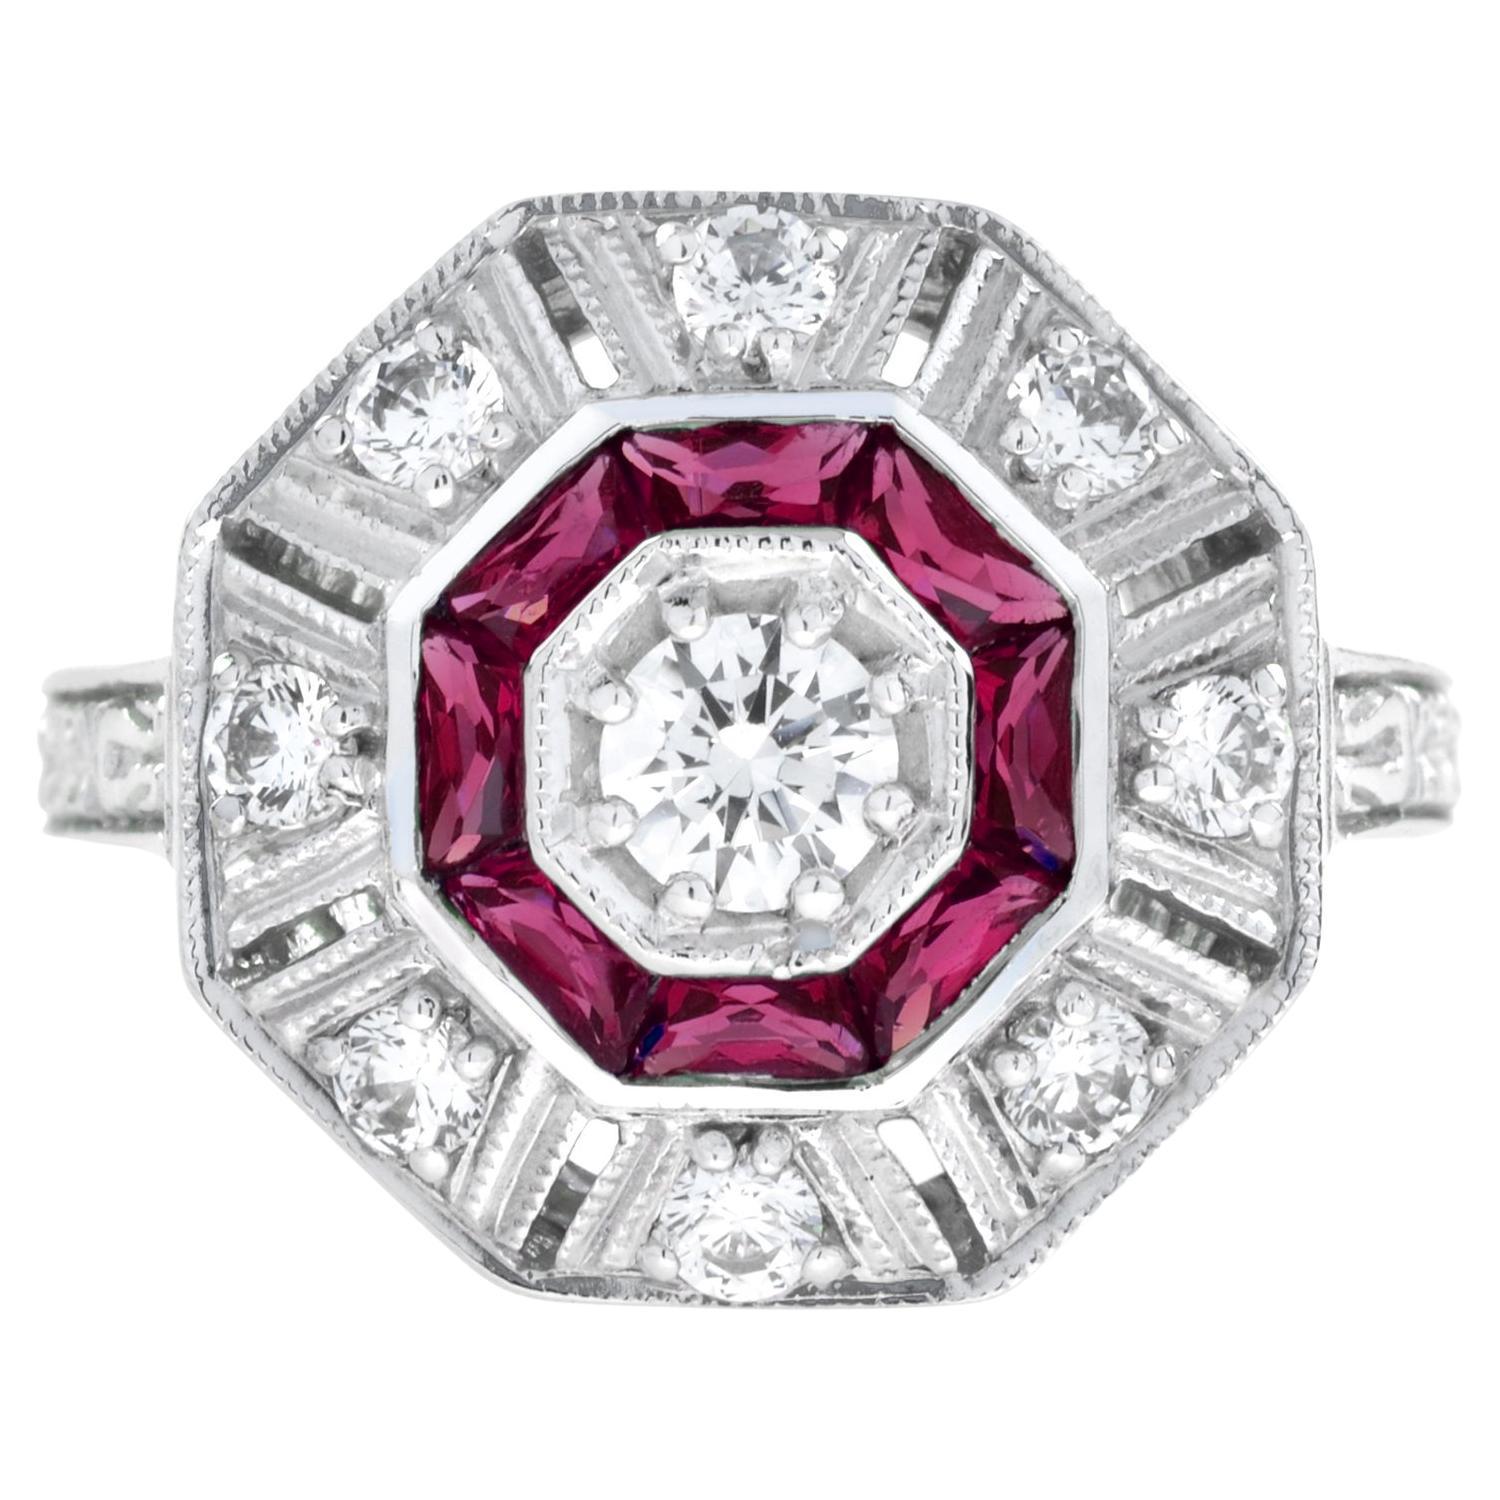 For Sale:  Diamond and Ruby Art Deco Style Octagon Target Ring in 18K White Gold